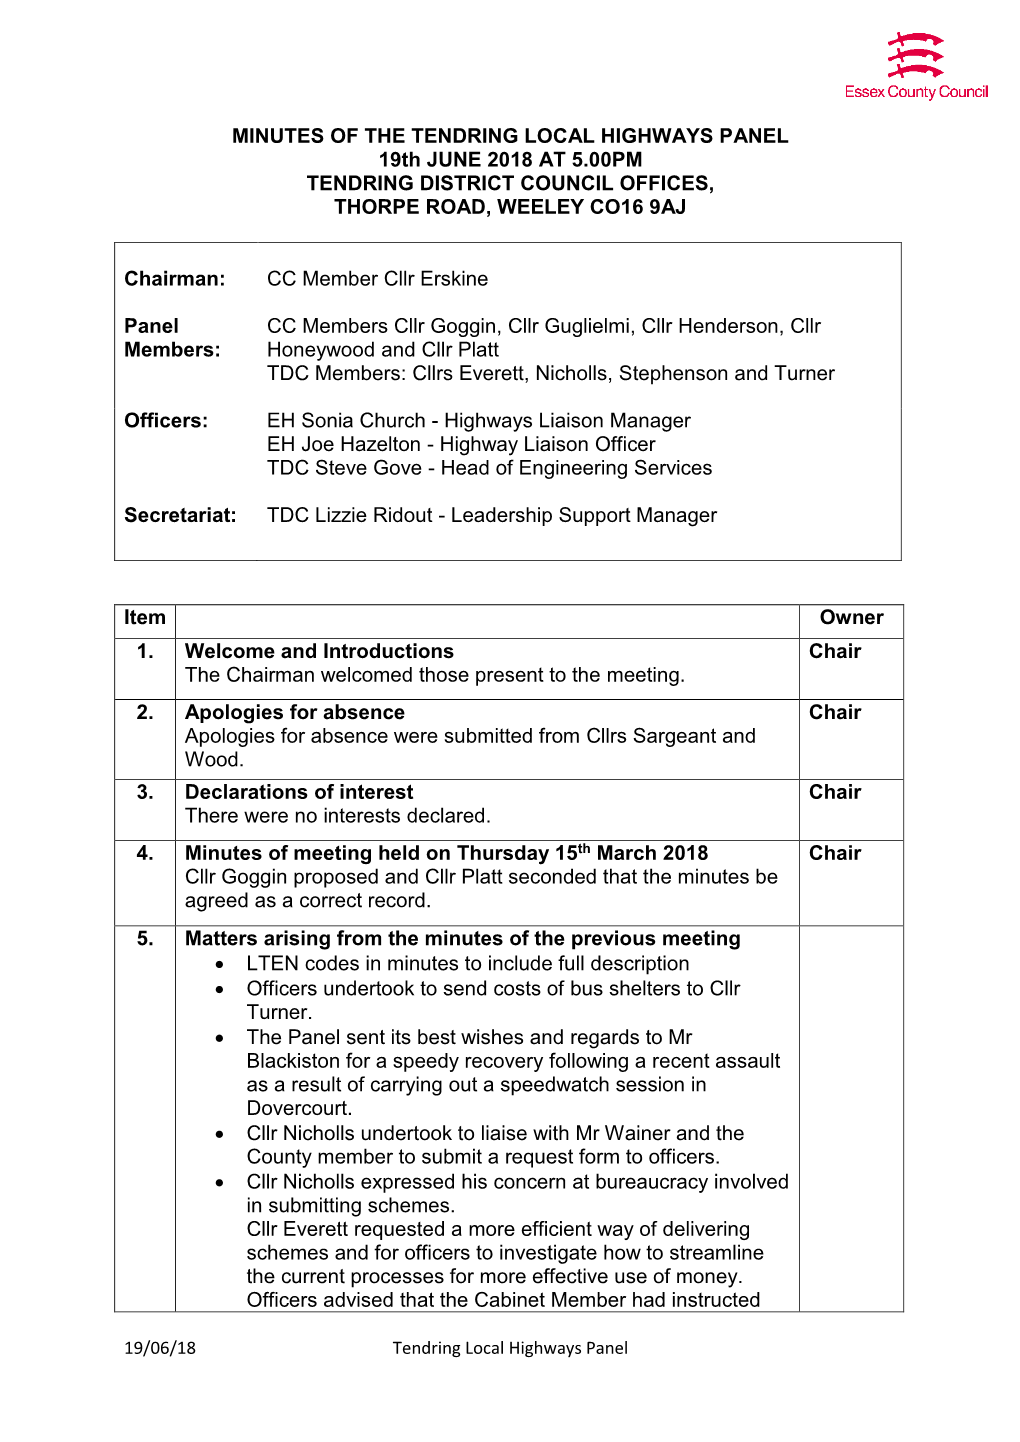 MINUTES of the TENDRING LOCAL HIGHWAYS PANEL 19Th JUNE 2018 at 5.00PM TENDRING DISTRICT COUNCIL OFFICES, THORPE ROAD, WEELEY CO16 9AJ